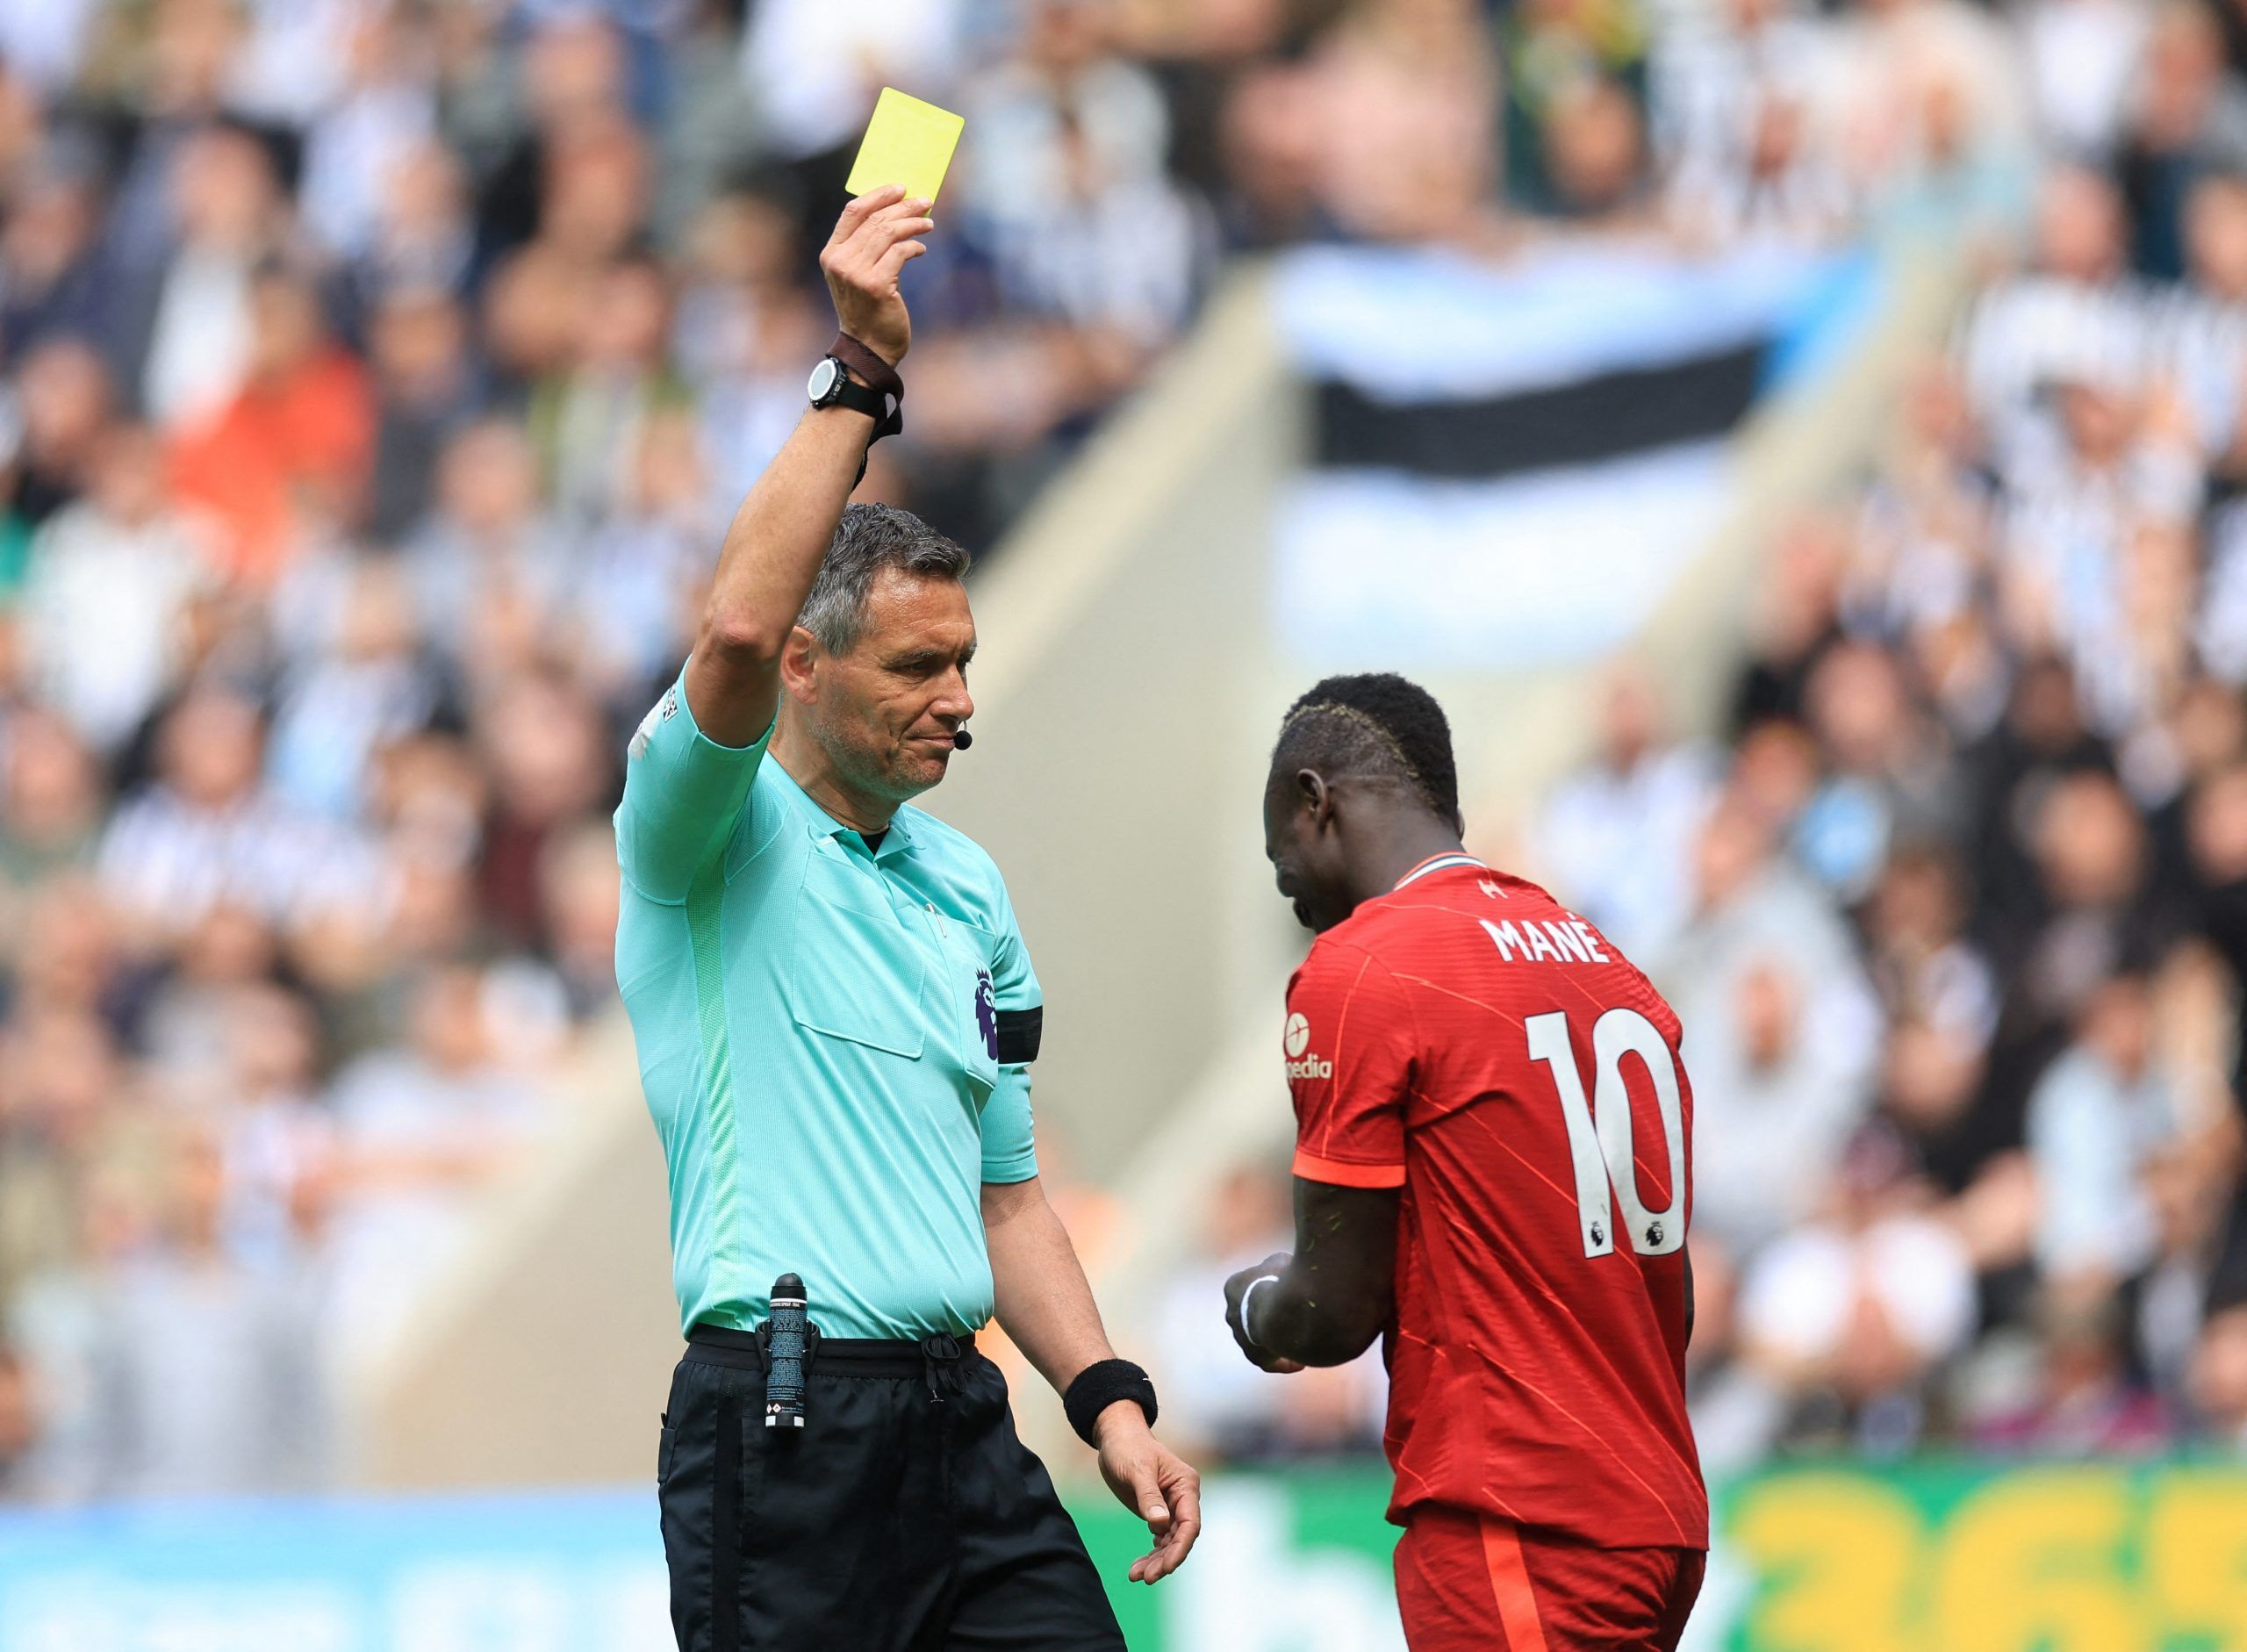 Soccer Football - Premier League - Newcastle United v Liverpool - St James' Park, Newcastle, Britain - April 30, 2022 Liverpool's Sadio Mane is shown a yellow card by referee Andre Marriner Action Images via Reuters/Lee Smith EDITORIAL USE ONLY. No use with unauthorized audio, video, data, fixture lists, club/league logos or 'live' services. Online in-match use limited to 75 images, no video emulation. No use in betting, games or single club /league/player publications.  Please contact your acco